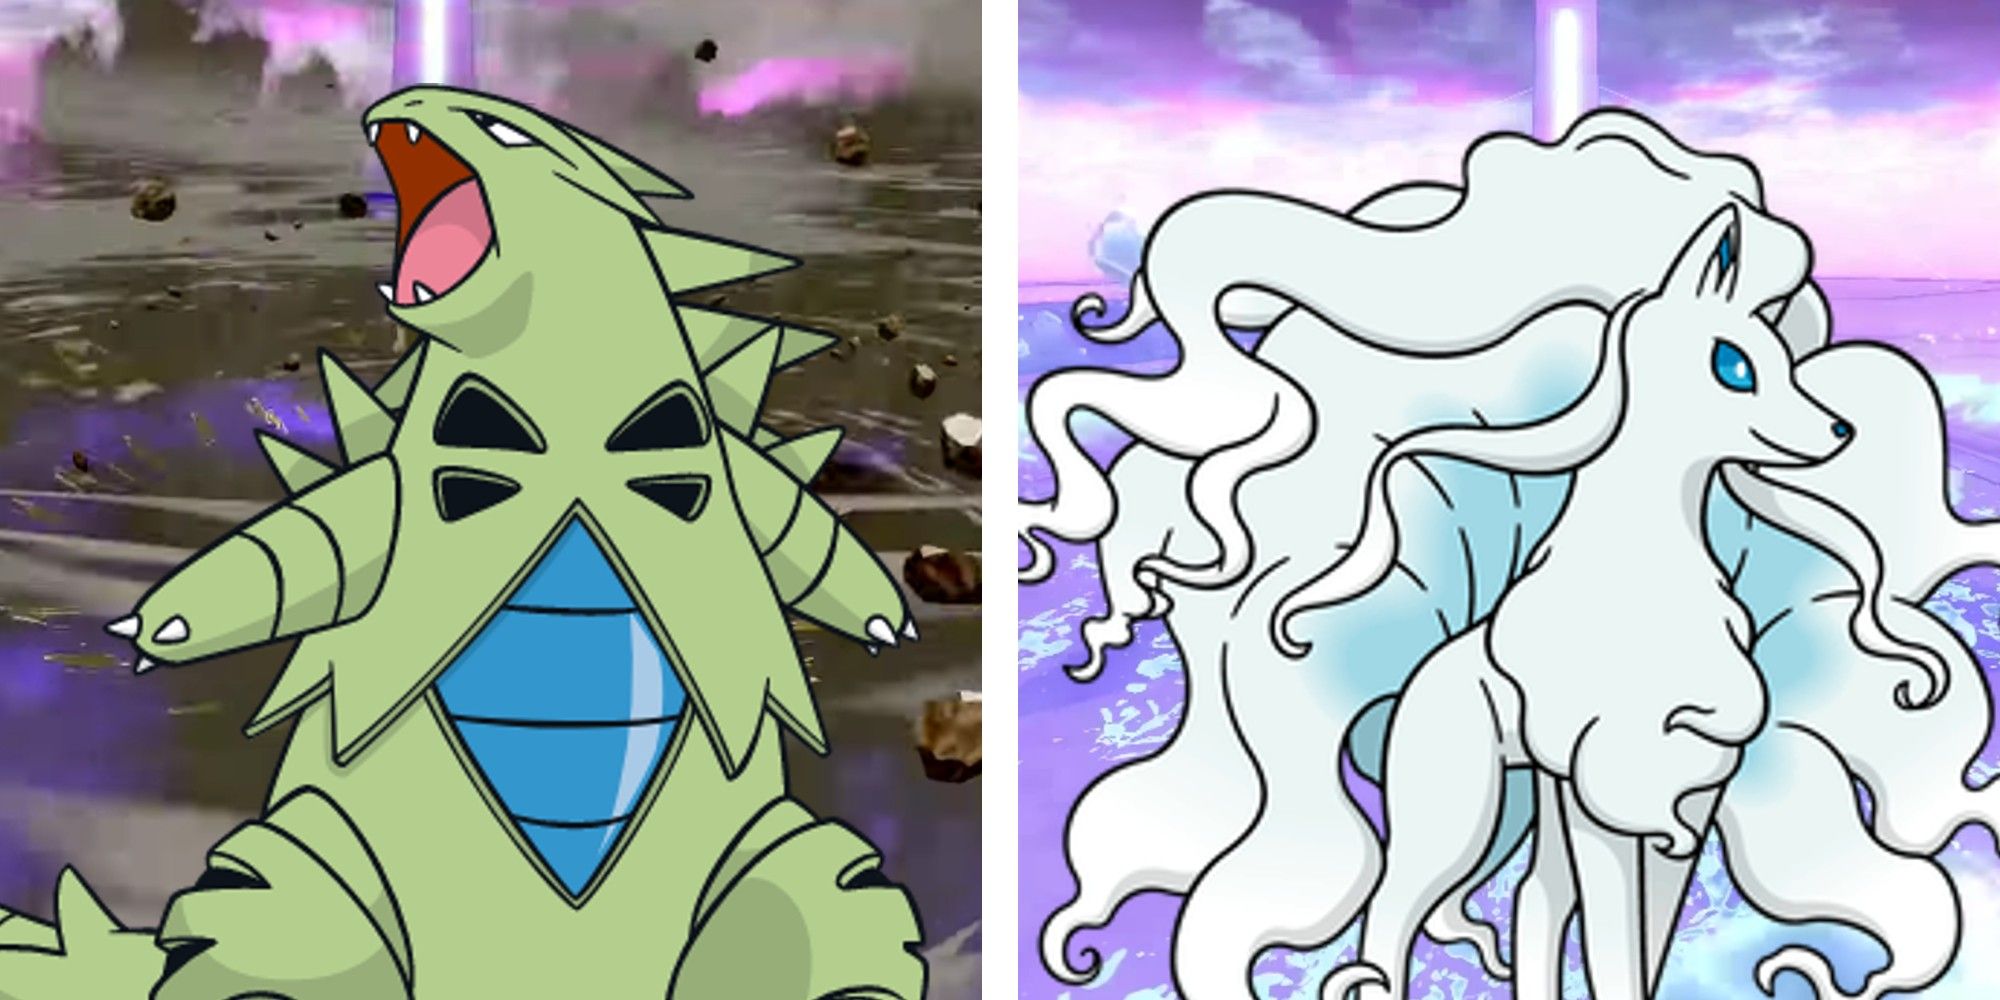 A split image: Tyranitar is on the left with Sandstorm, and A-Ninetales is on the right with Hail.